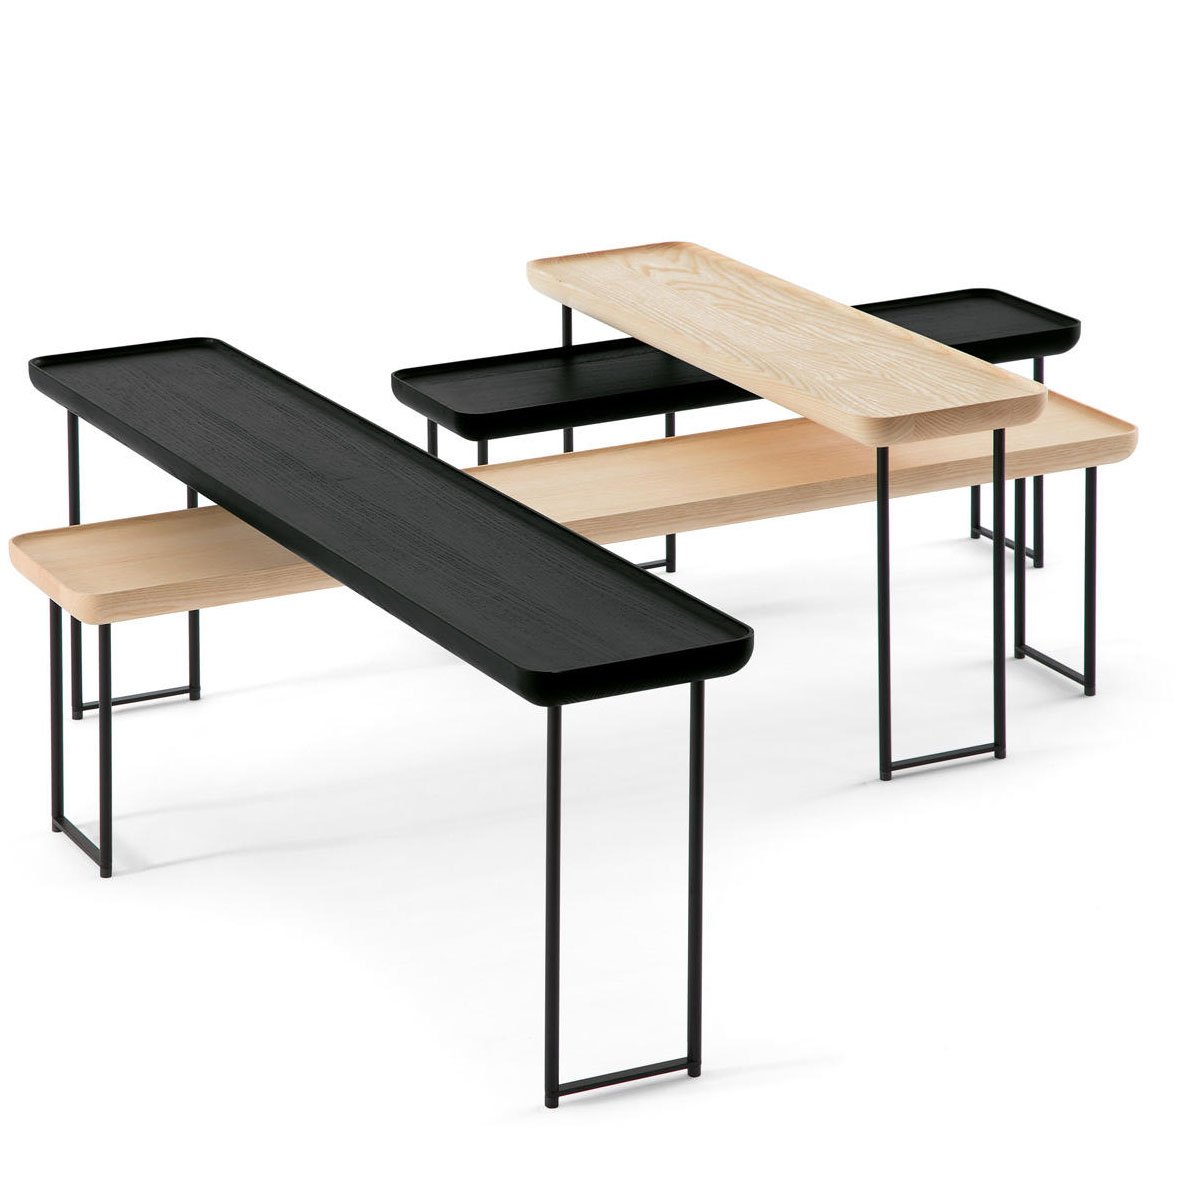 Haworth Torei Table in multiple colors and sizes with rectangular tops and steel legs